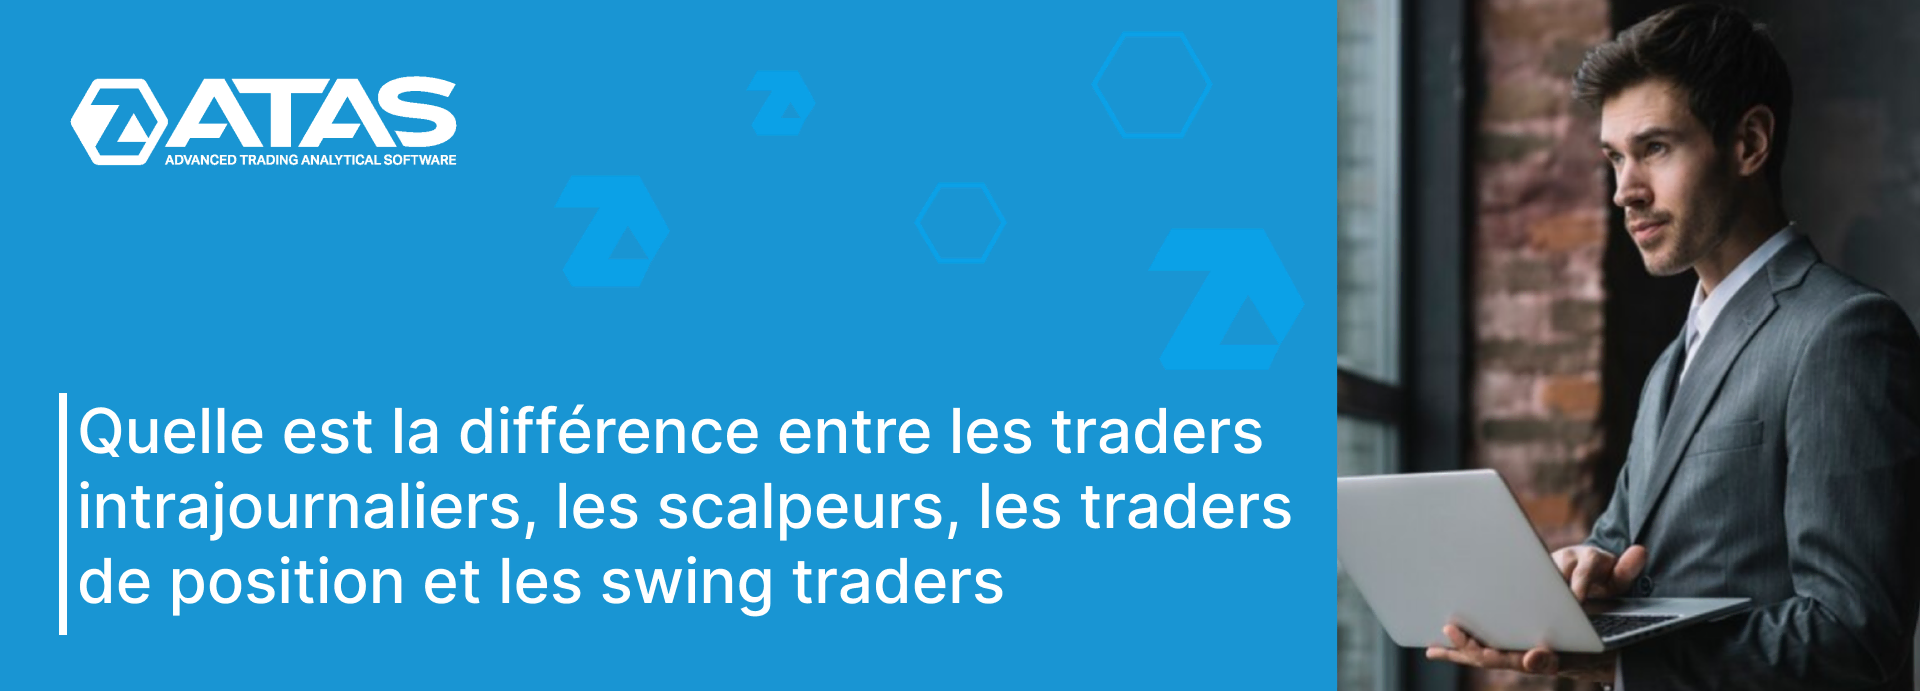 Classification des traders-1